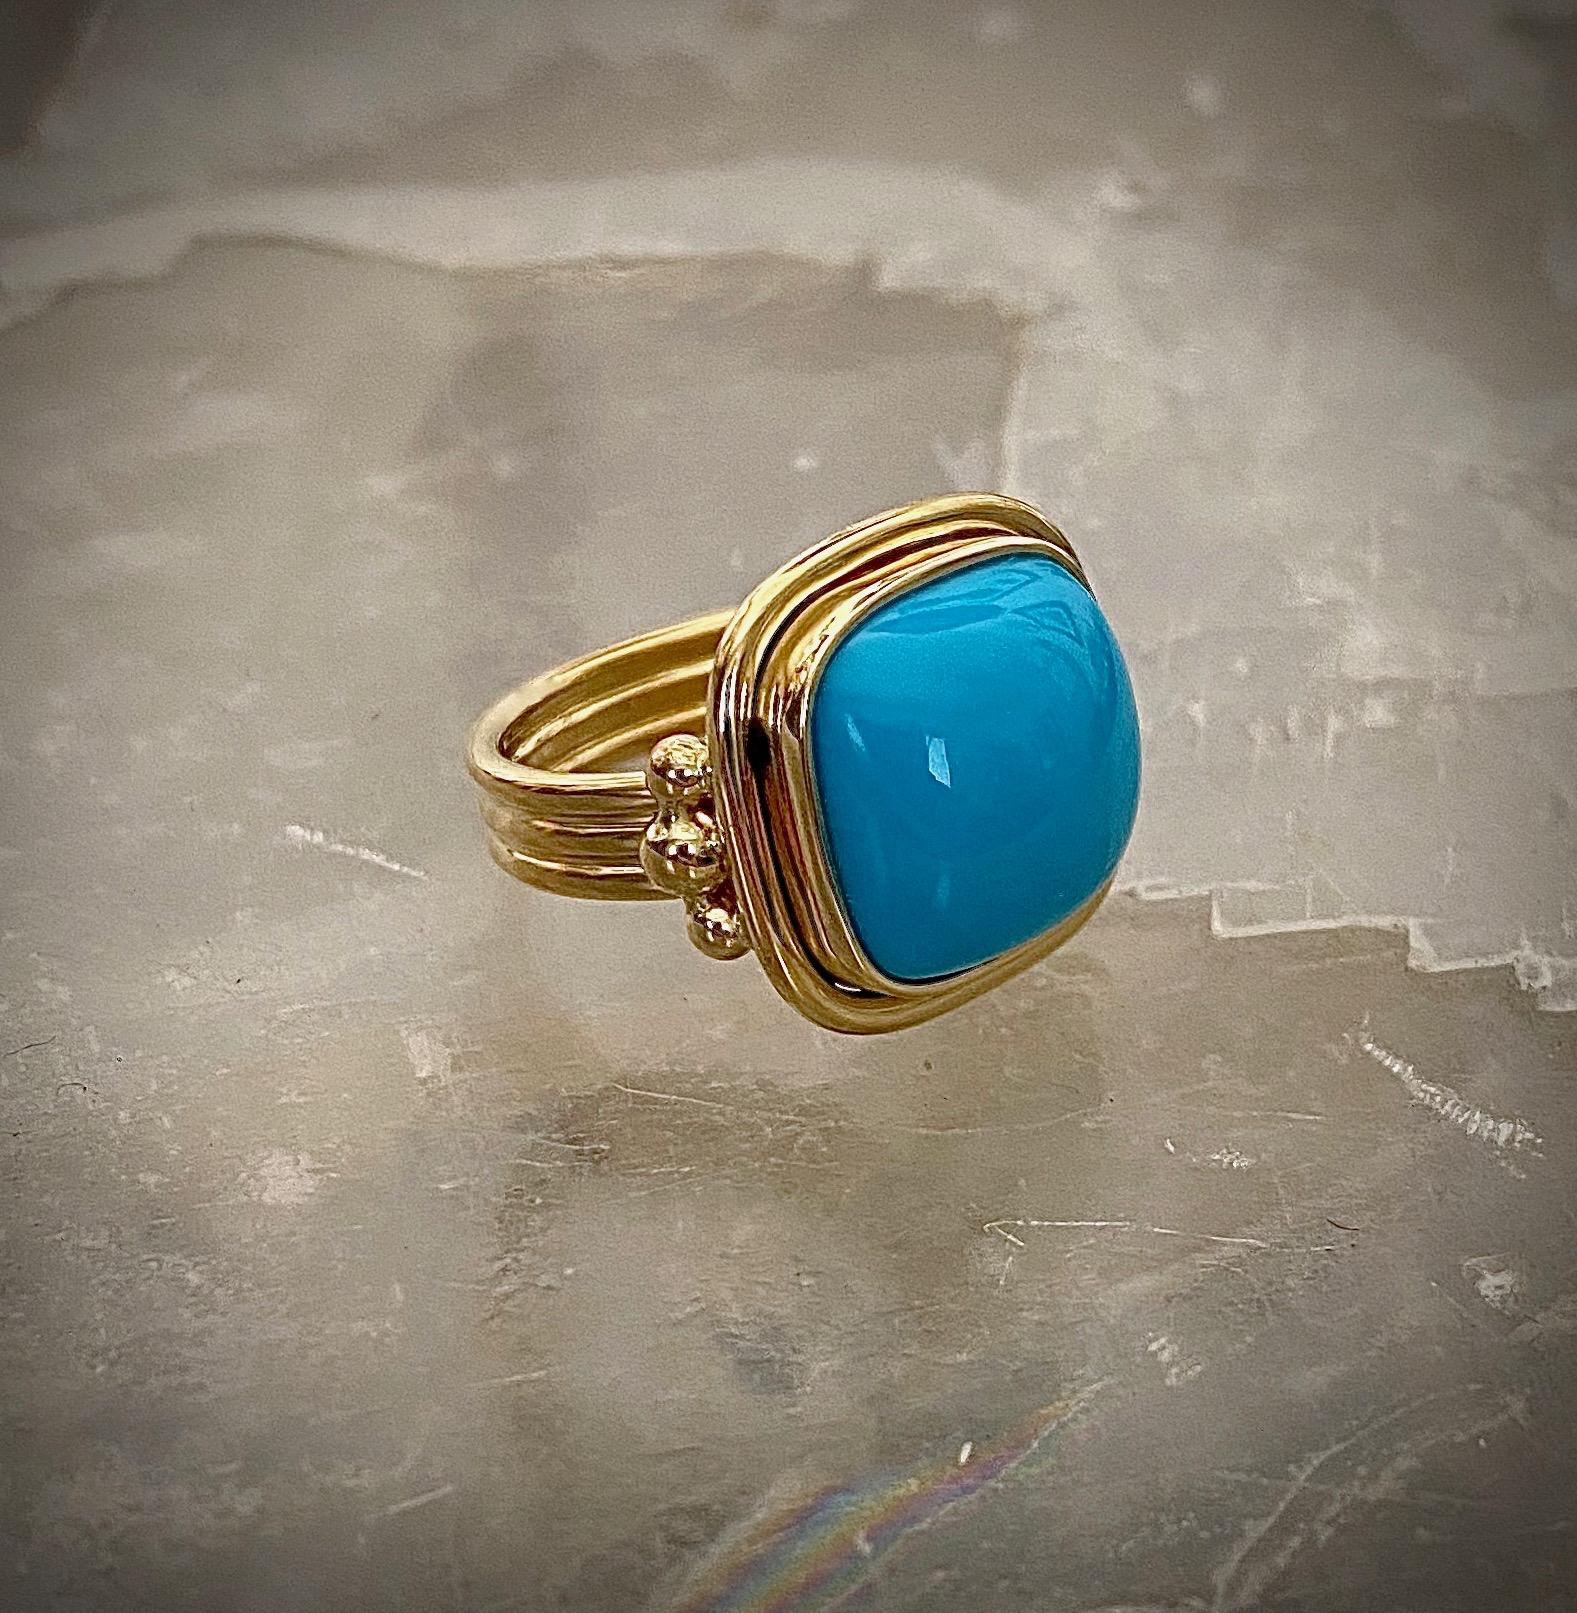 Sleeping Beauty turquoise is featured in this archaic style ring.  Sleeping Beauty turquoise (origin: Arizona) is considered to be the finest in the world.  The gem is becoming increasingly difficult to acquire as the mine was closed in 2012.  This